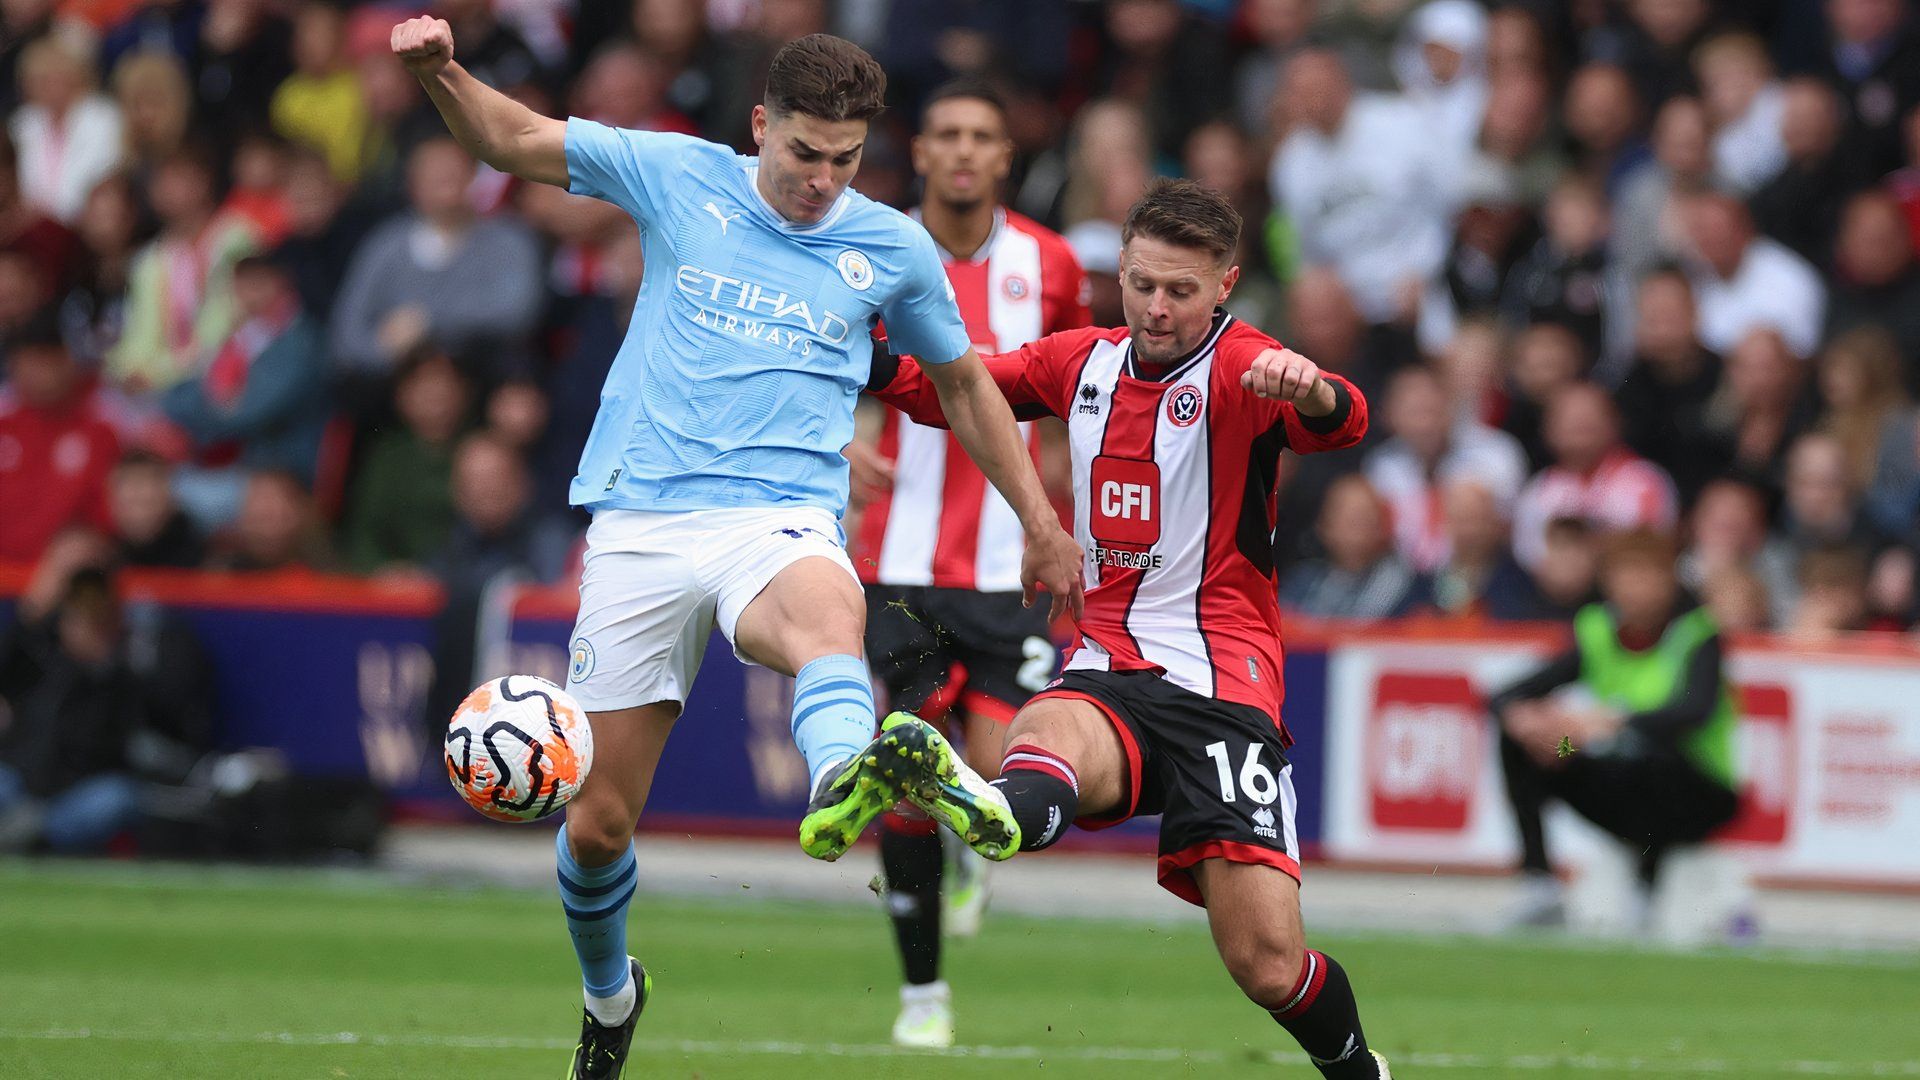 Ollie Norwood for Sheffield United vs Manchester City